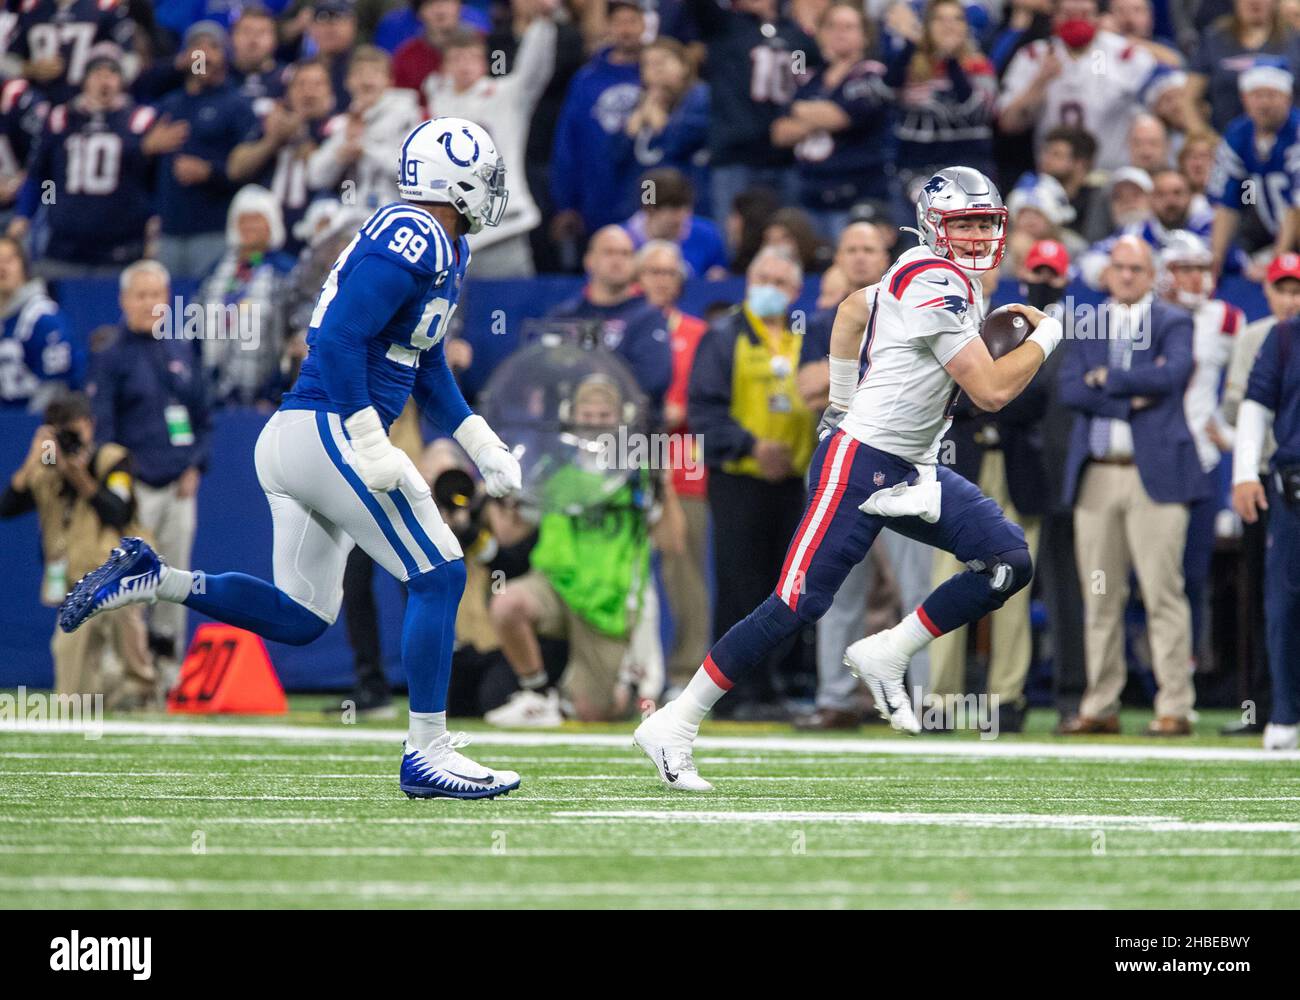 Indianapolis, Indiana, USA. 18th Dec, 2021. New England Patriots quarterback Mac Jones (10) runs with the ball as Indianapolis Colts defensive lineman DeForest Buckner (99) pursues during NFL football game action between the New England Patriots and the Indianapolis Colts at Lucas Oil Stadium in Indianapolis, Indiana. Indianapolis defeated New England 27-17. John Mersits/CSM/Alamy Live News Stock Photo